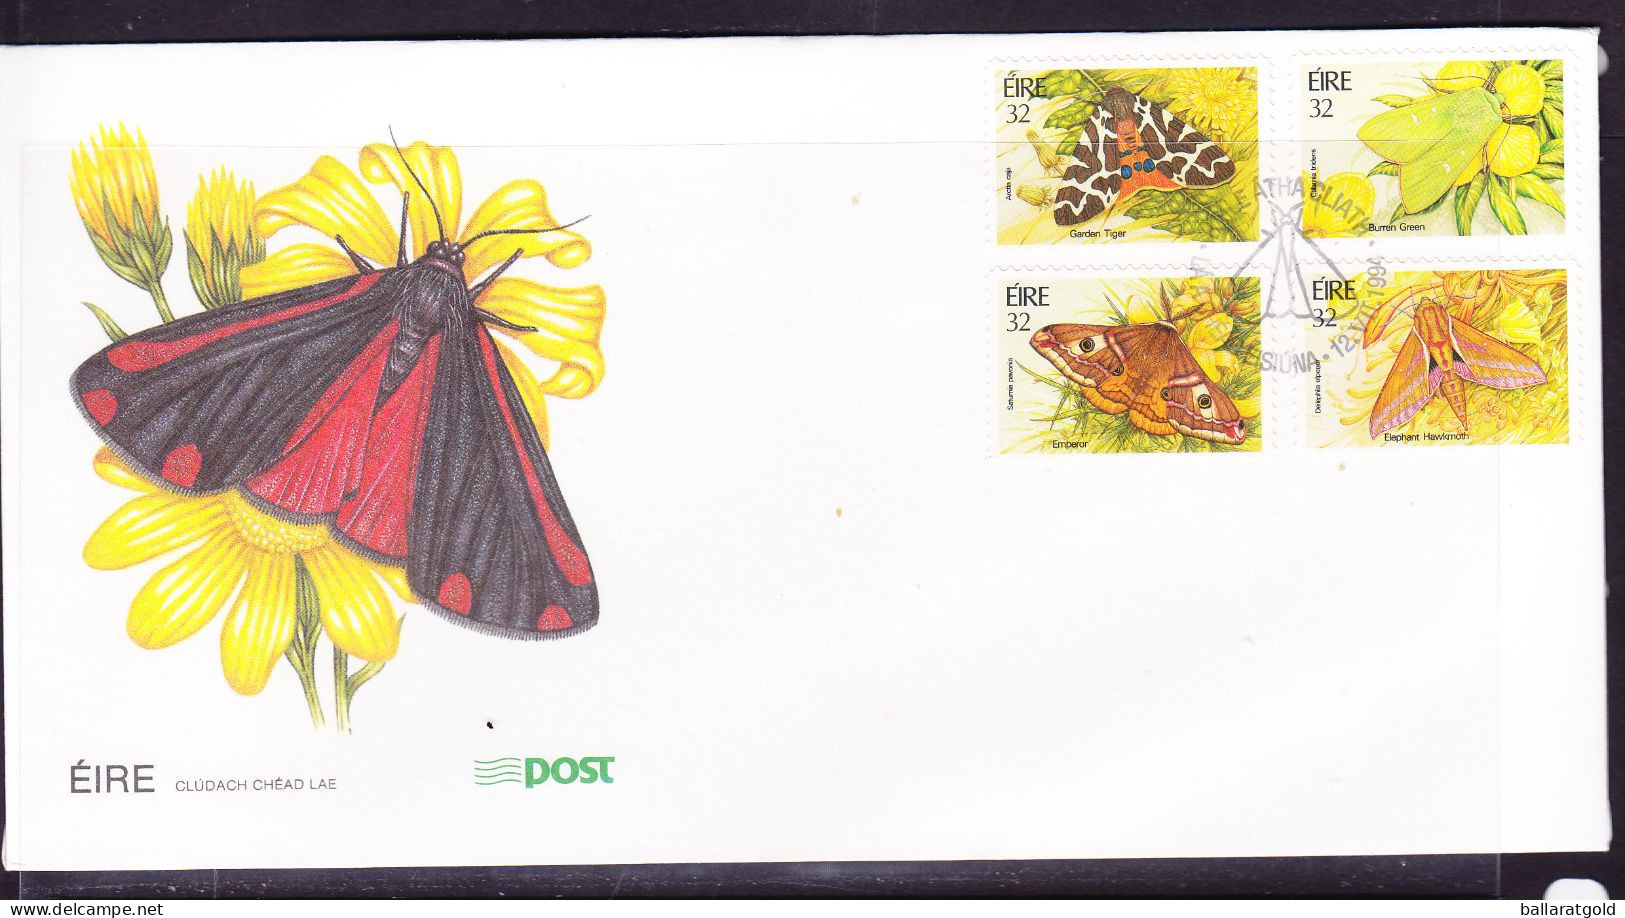 Ireland 1994 Butterflies First Day Cover - Unaddressed - Lettres & Documents